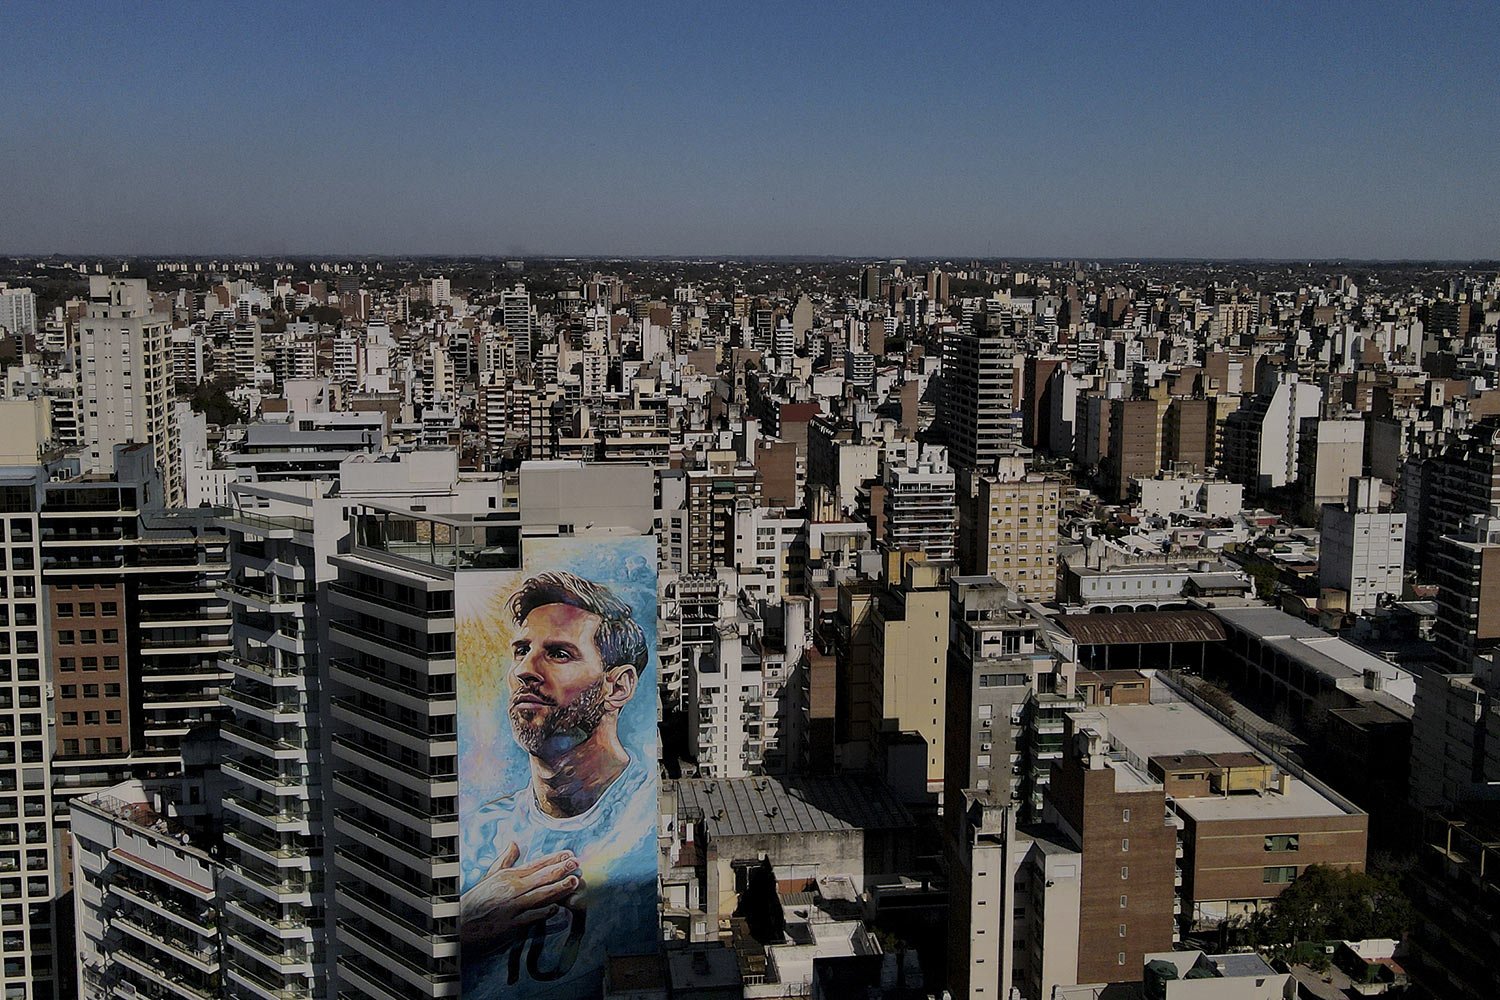  A mural of soccer player Lionel Messi blankets the facade of an apartment building in Rosario, Argentina, Friday, Aug. 19, 2022. (AP Photo/Natacha Pisarenko) 